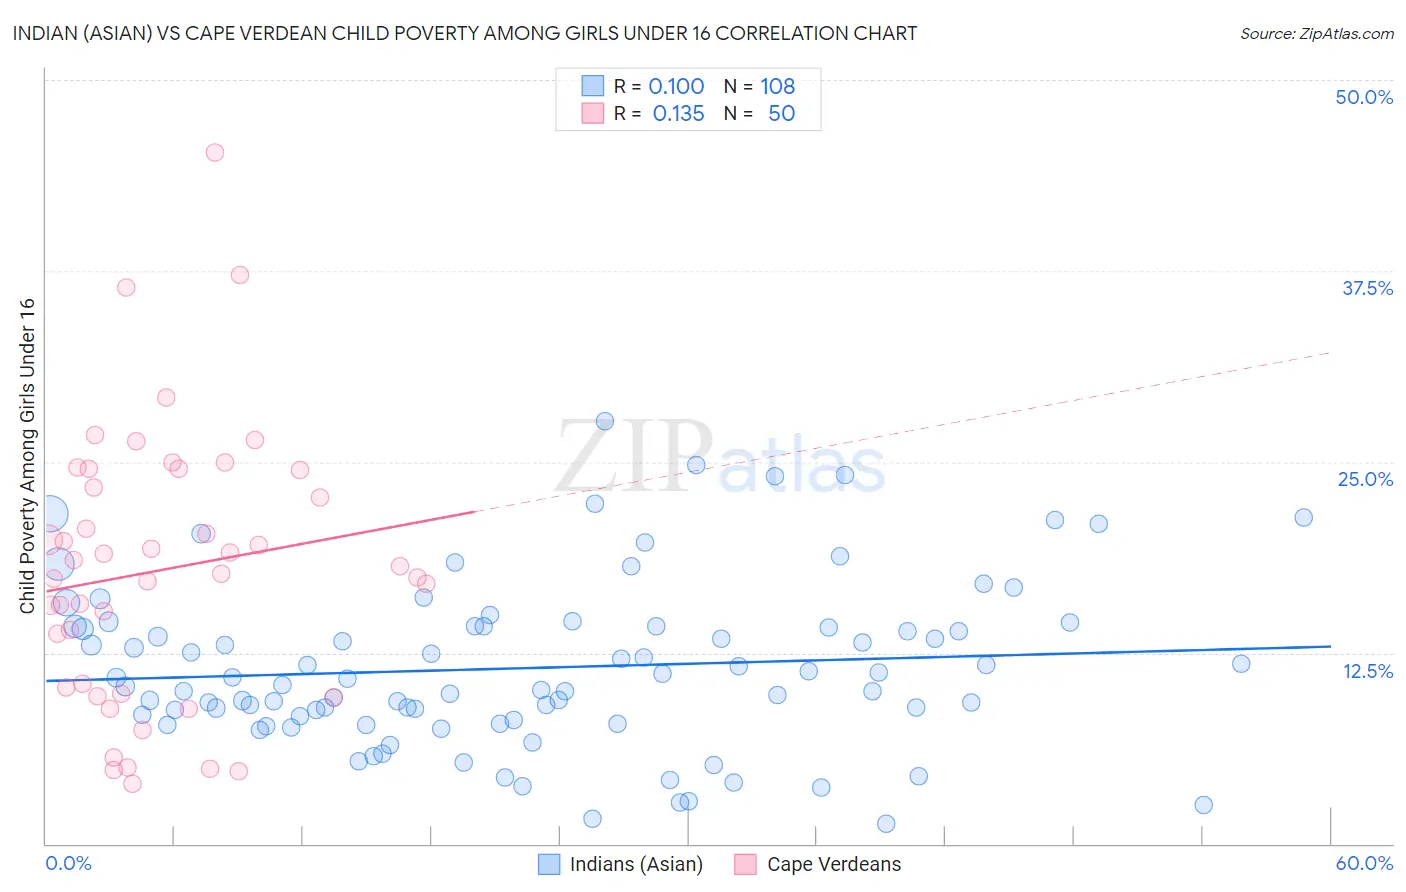 Indian (Asian) vs Cape Verdean Child Poverty Among Girls Under 16